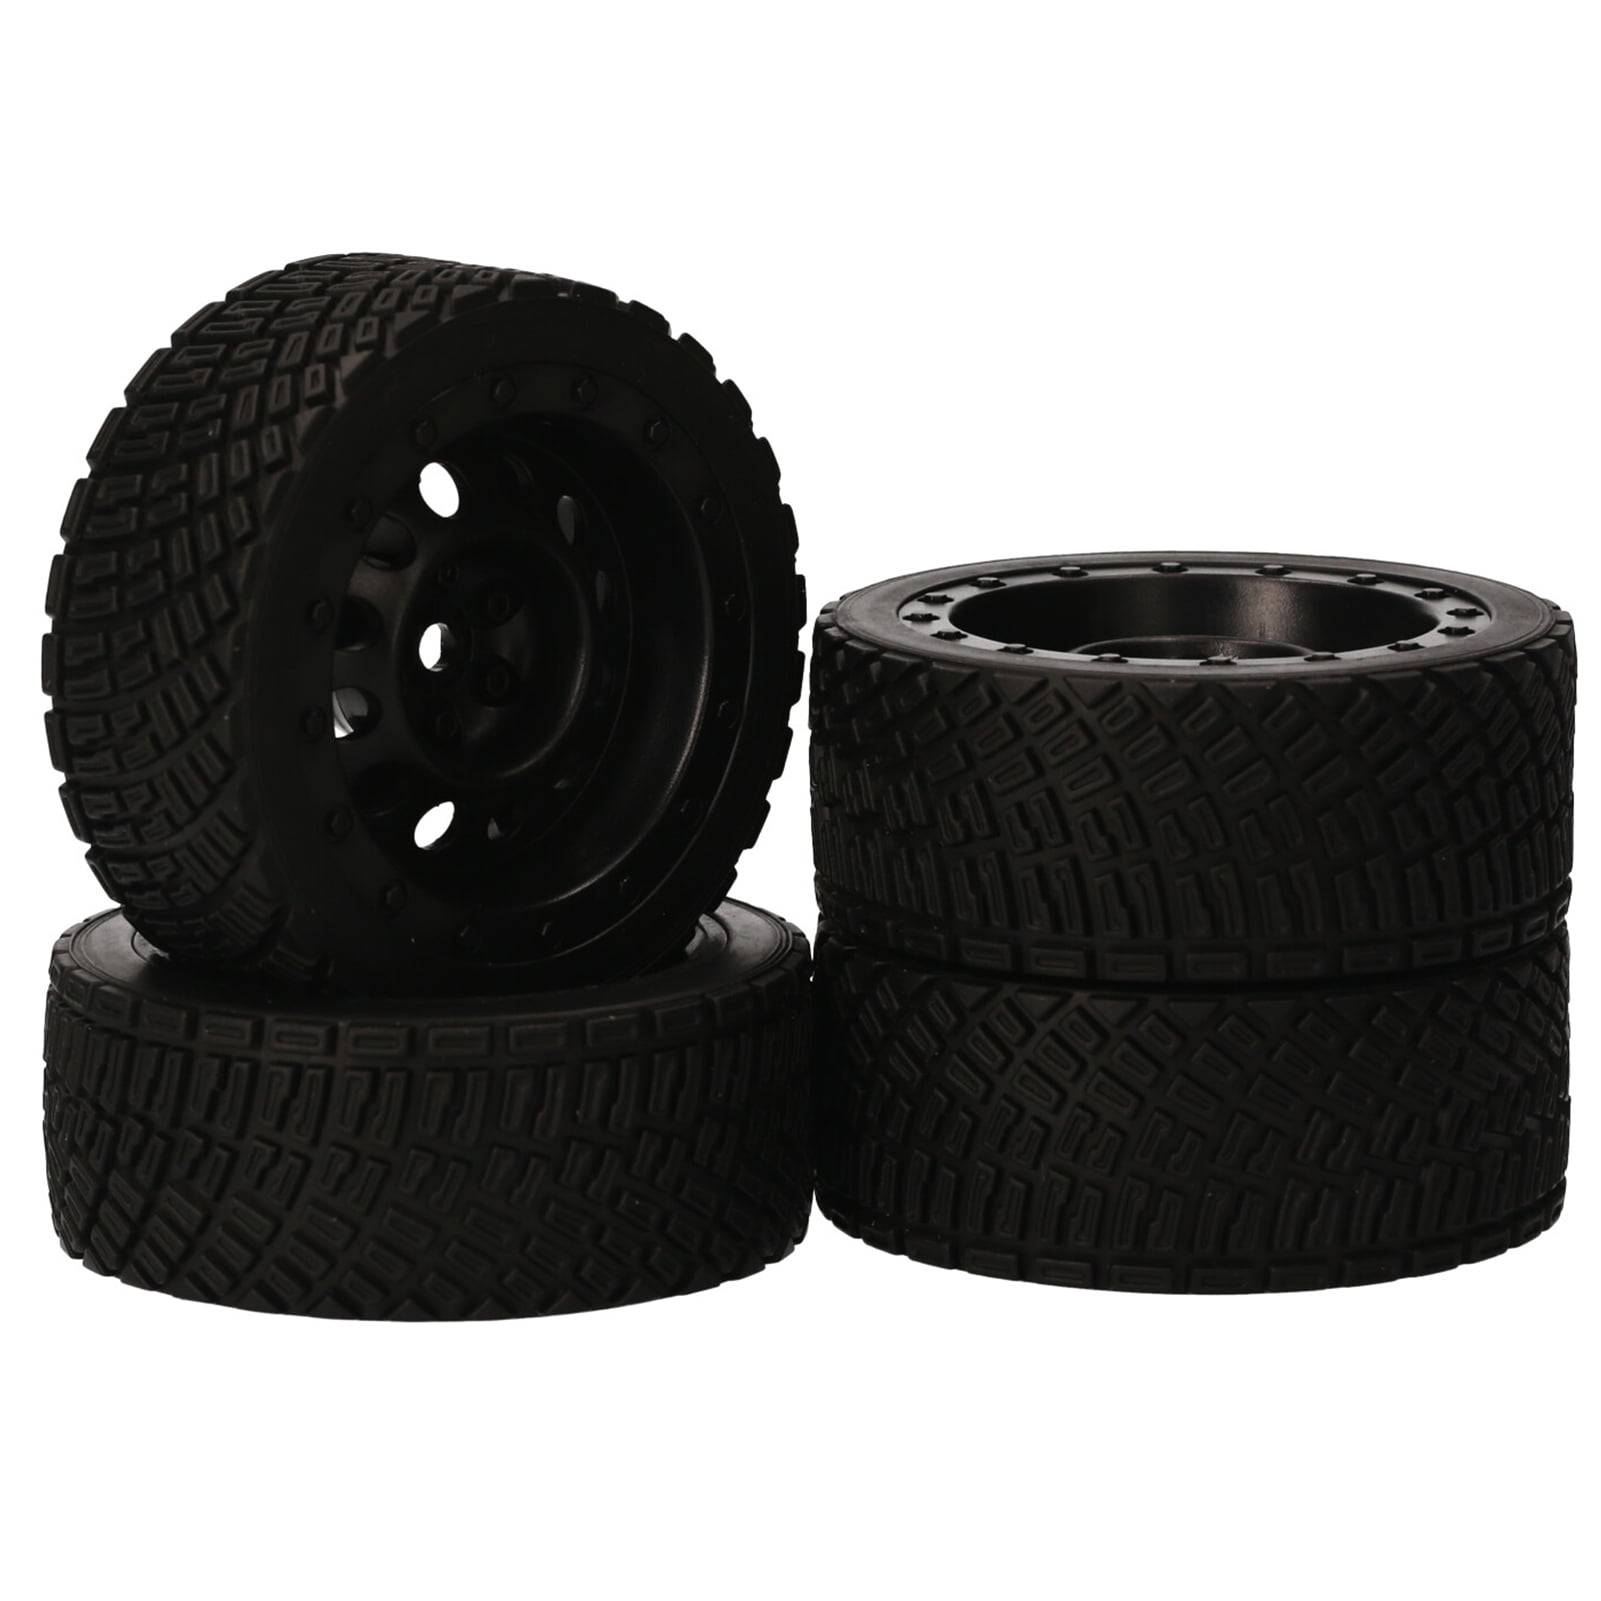 For HSP 1/10 On-Road Racing Car Rim02H-8006 Details about   RC Grip Rubber Tires & Wheel 4P